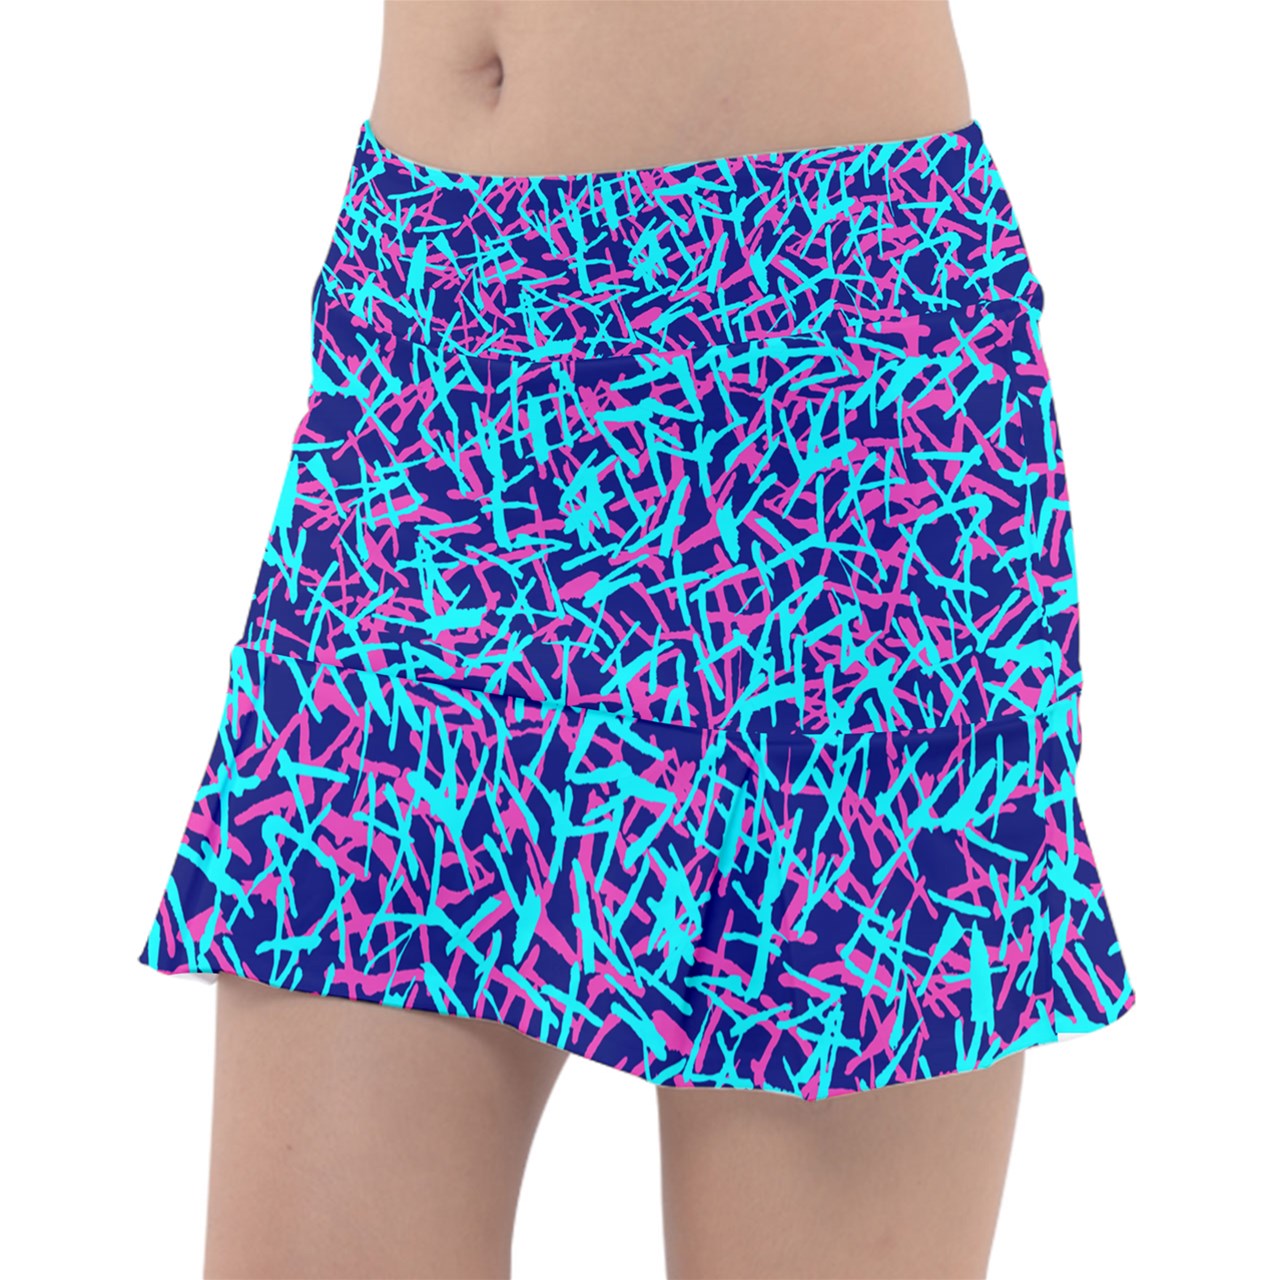 Dizzy Pickle Lesia Confetti BBP Women's Pickleball Classic Skort with Inner Shorts and Pockets